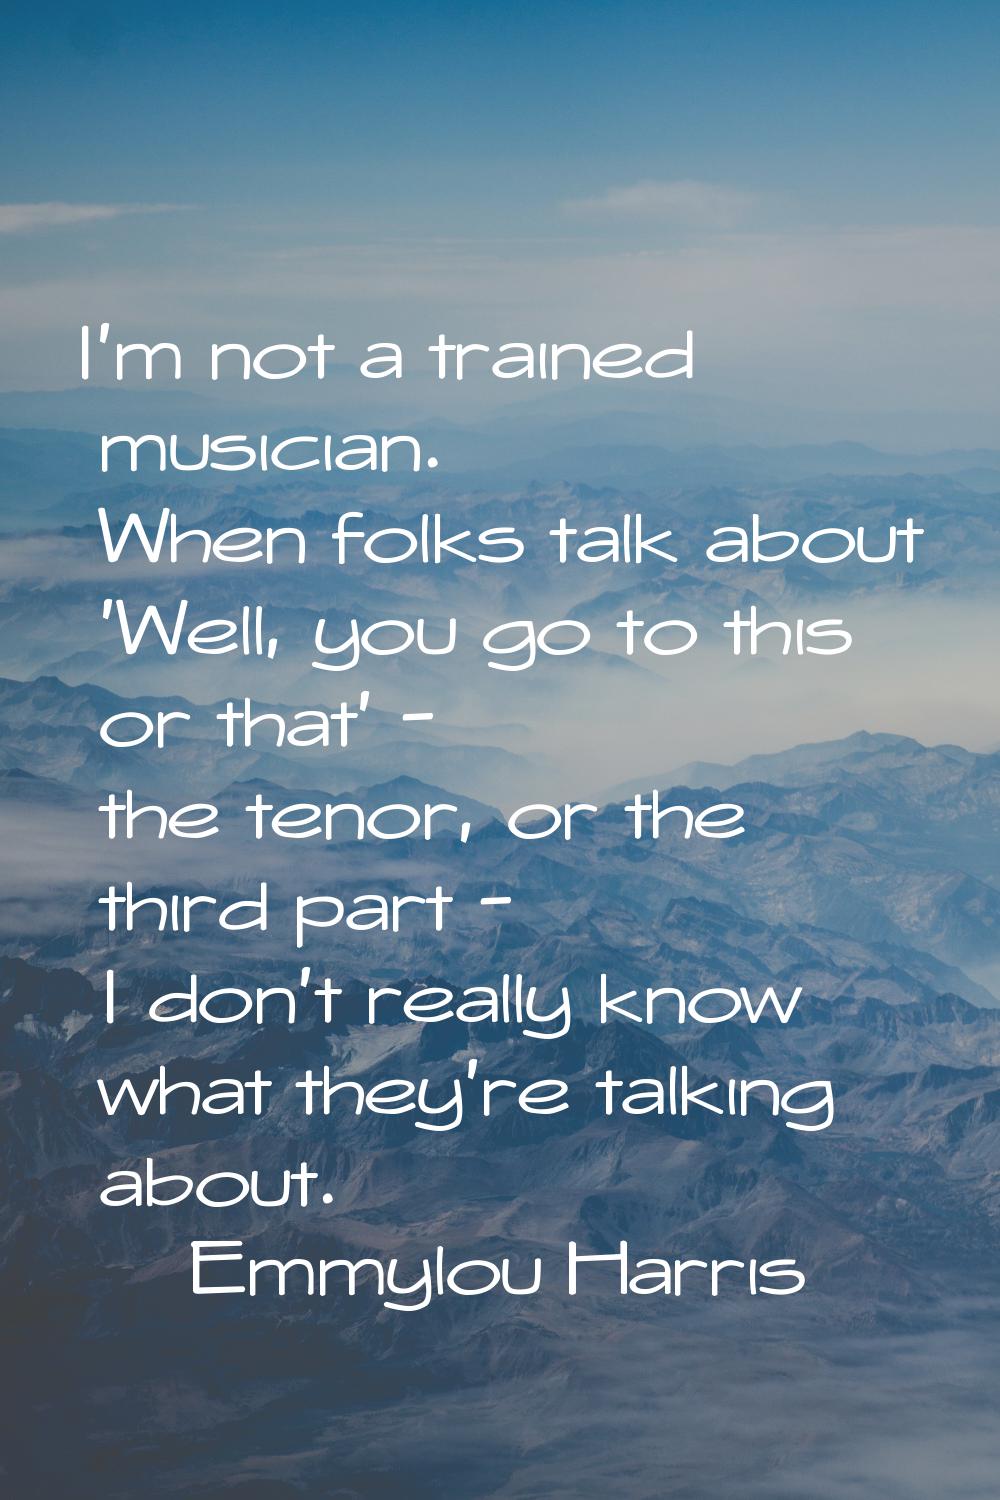 I'm not a trained musician. When folks talk about 'Well, you go to this or that' - the tenor, or th